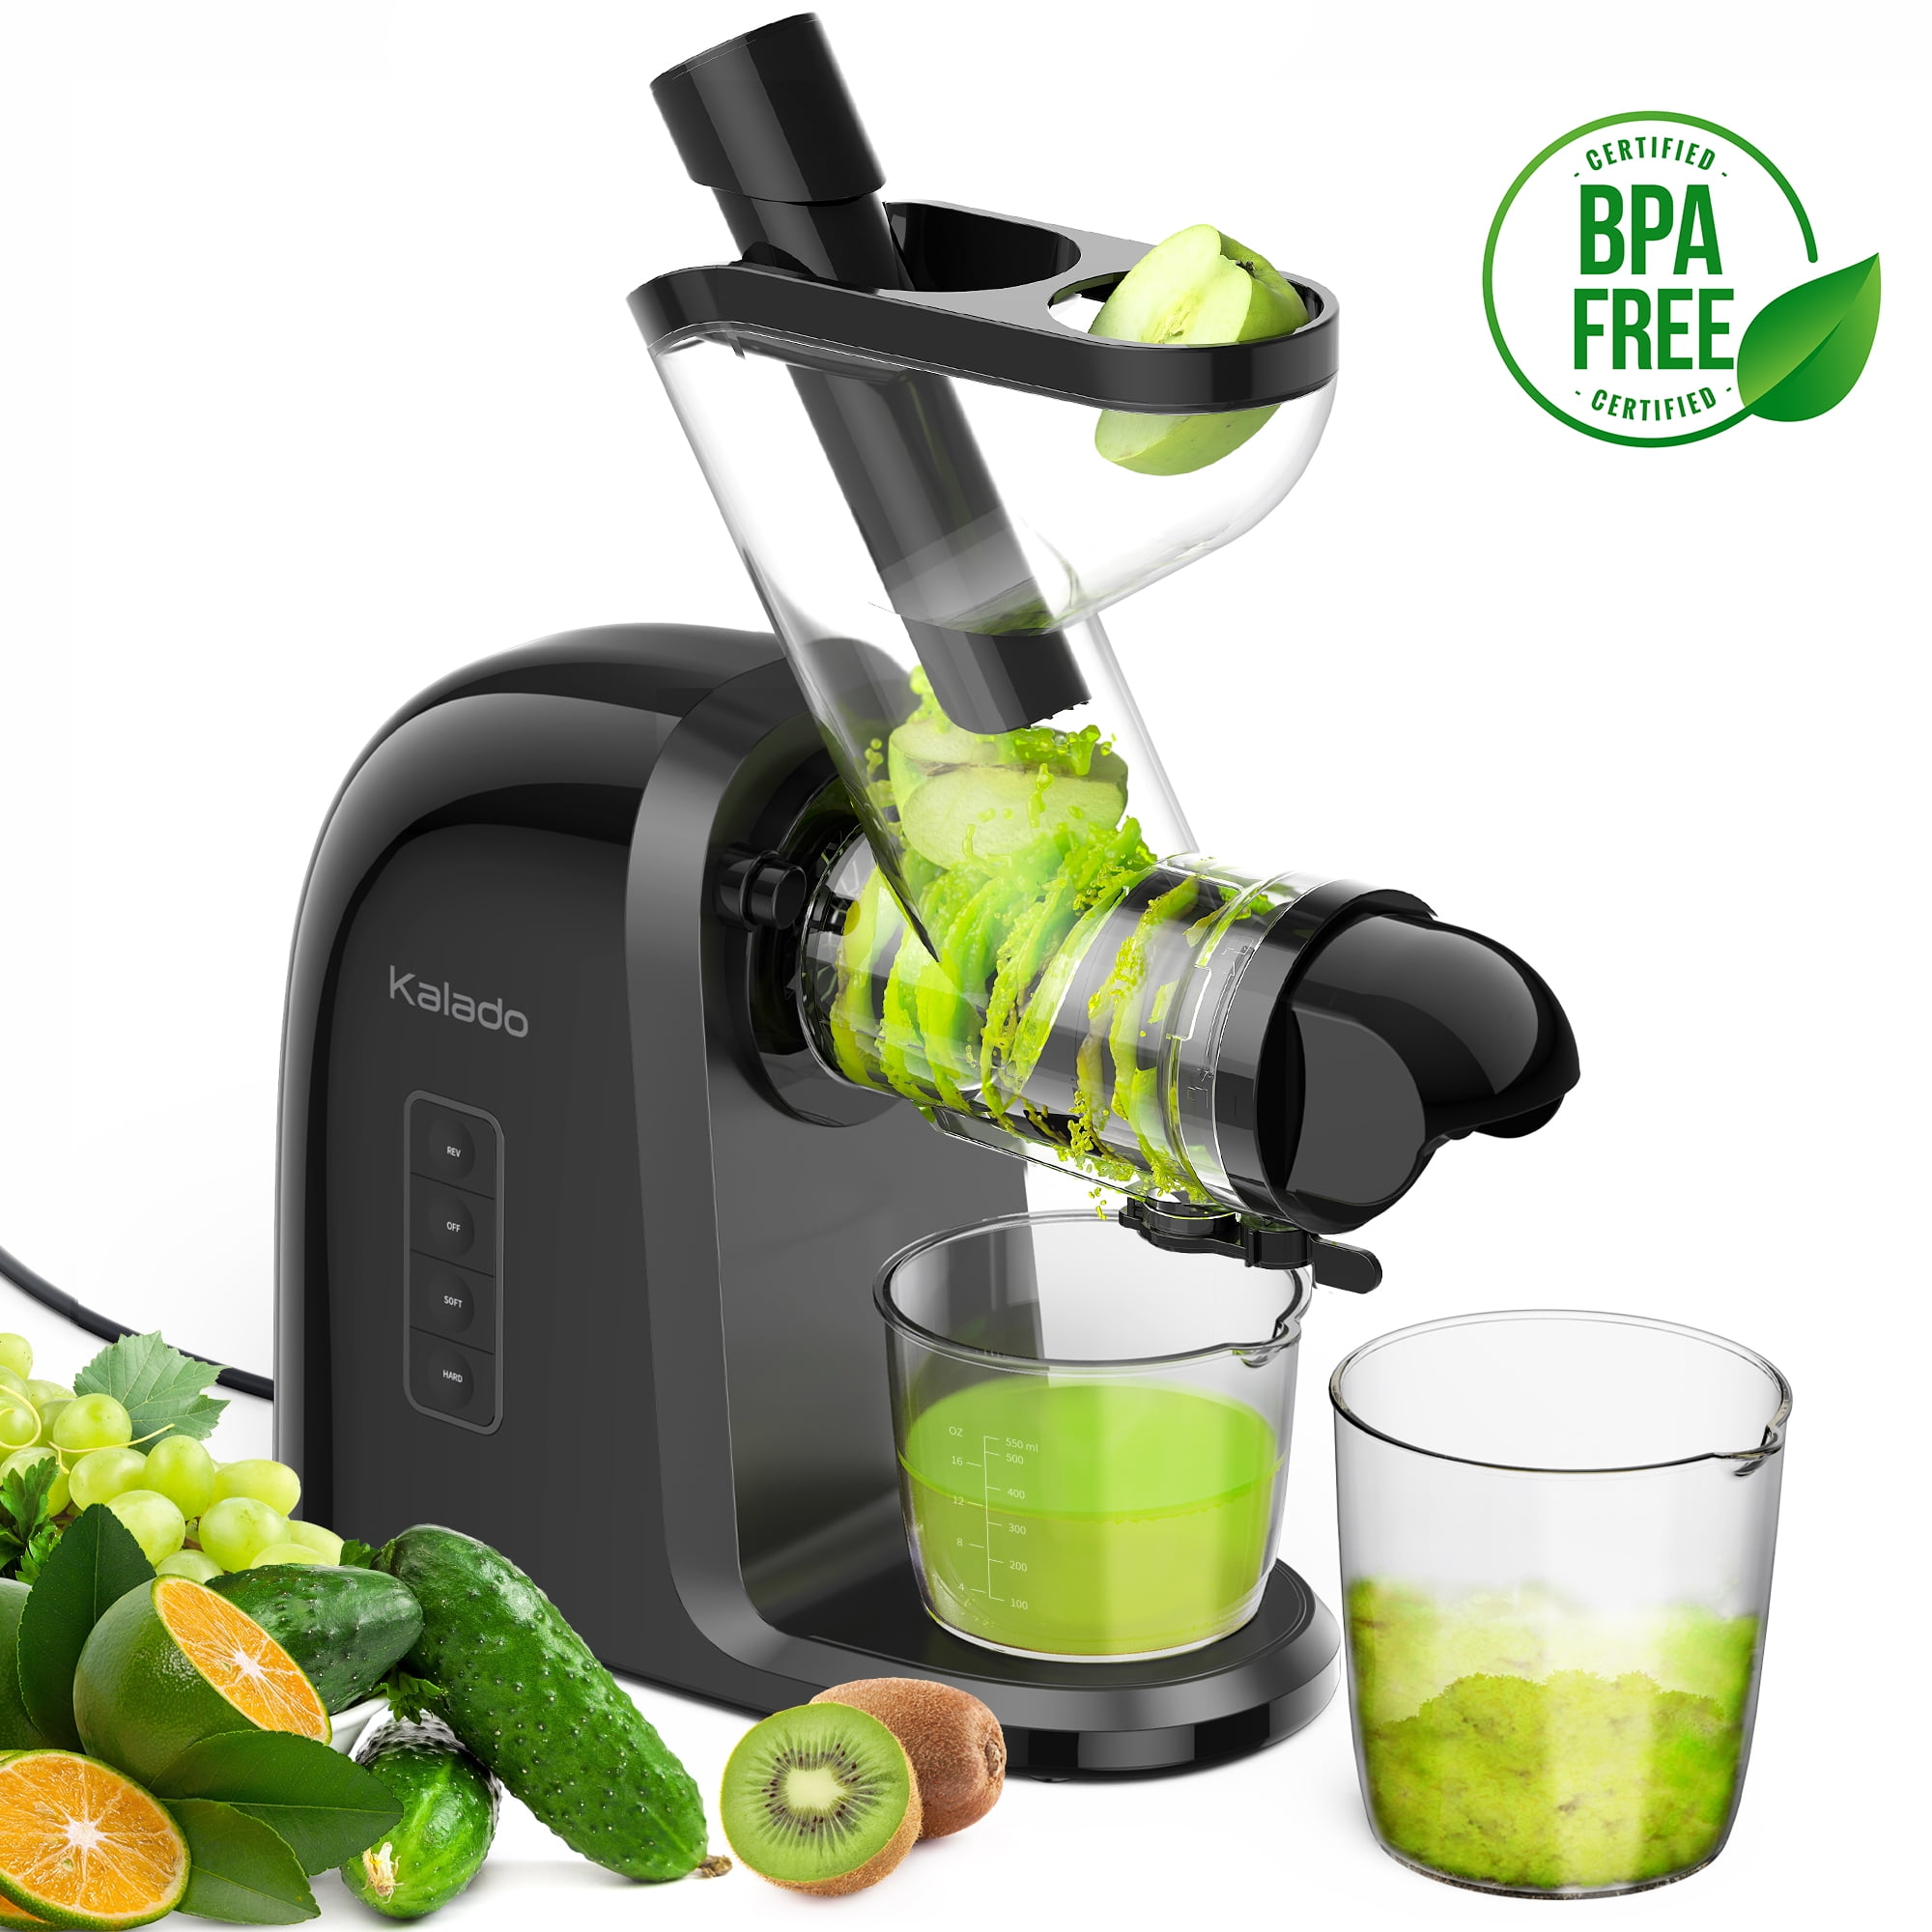 Slow Masticating Juicer, Kalado 200W Power Cold Press Juicer, BPA-FREE with Quiet Motor,Keep Fresh and Easy to Clean, 6 stages of presssing Large Chute and 2 Portable Glasses - Walmart.com